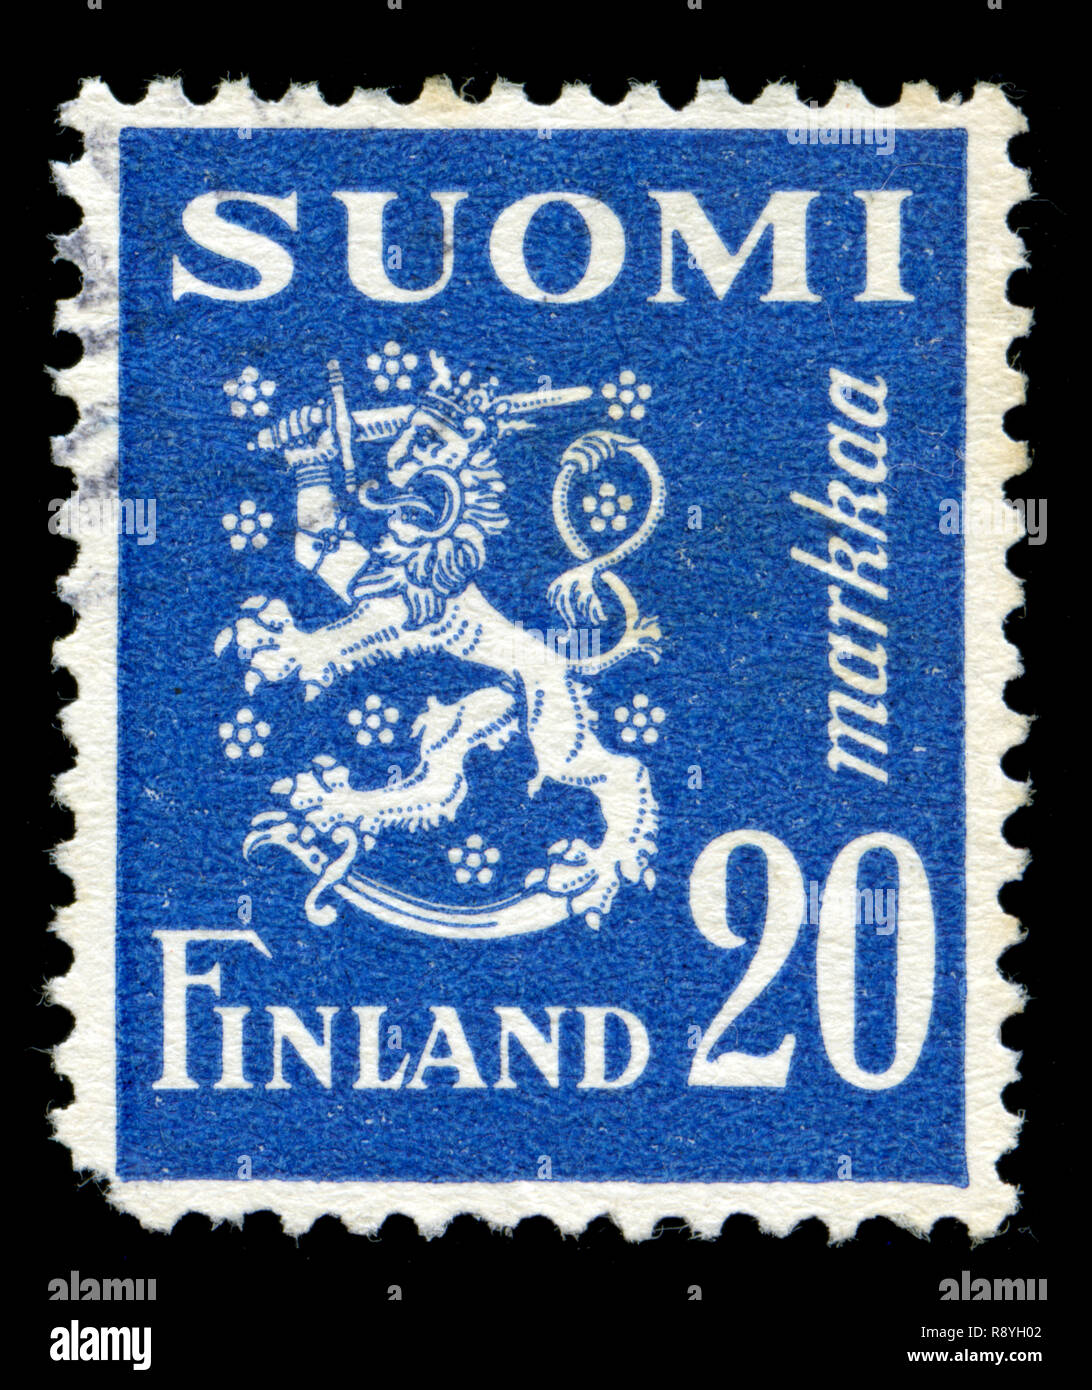 Postage stamp from Finland in the Model 1930 Lion series issued in 1950  Stock Photo - Alamy